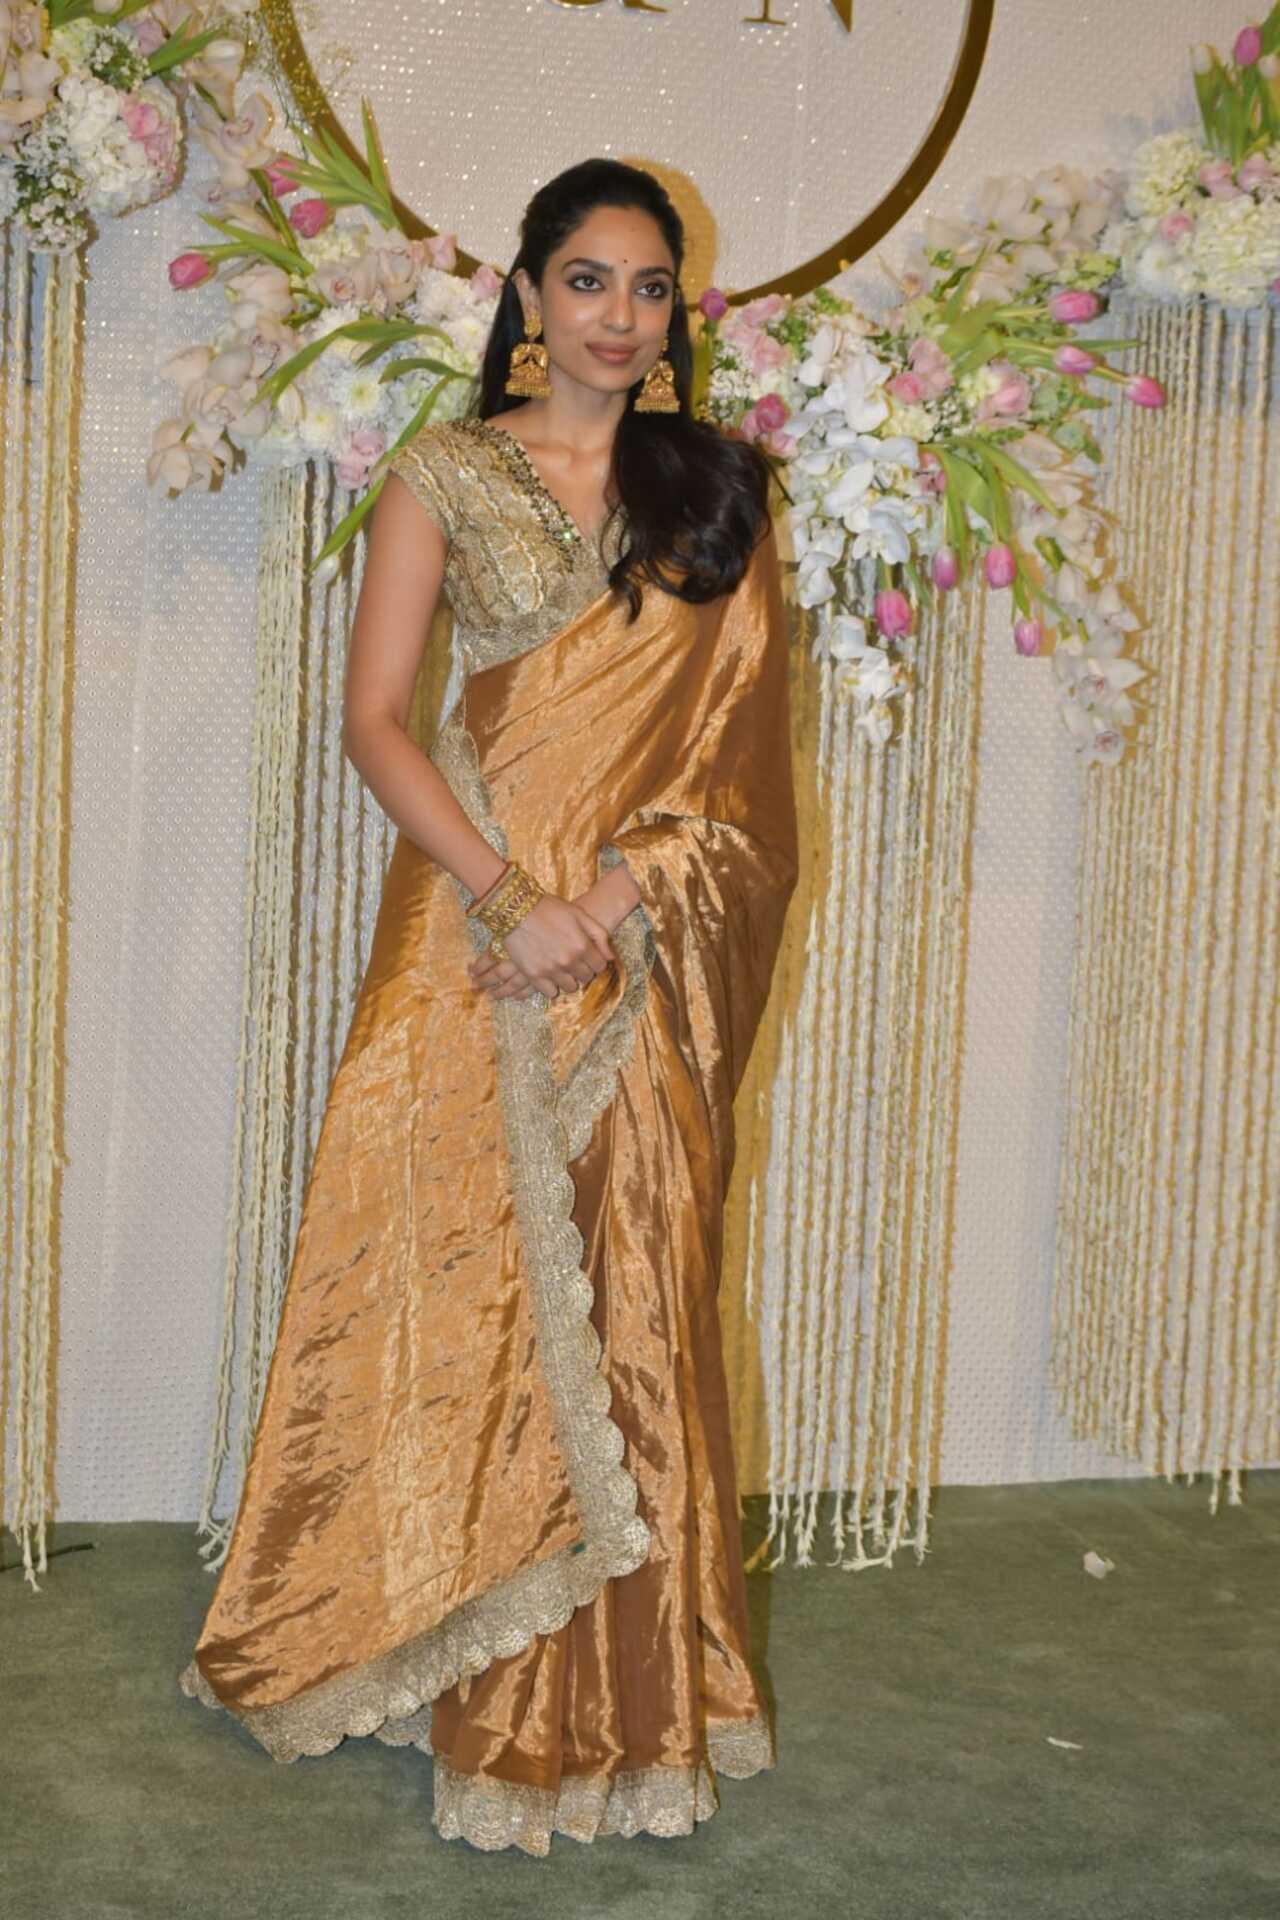 Sobhita Dhulipala opted for a golden tissue saree. She tied her hair in a semi-pony and let her statement jhumkas give the complete desi look to her outfit